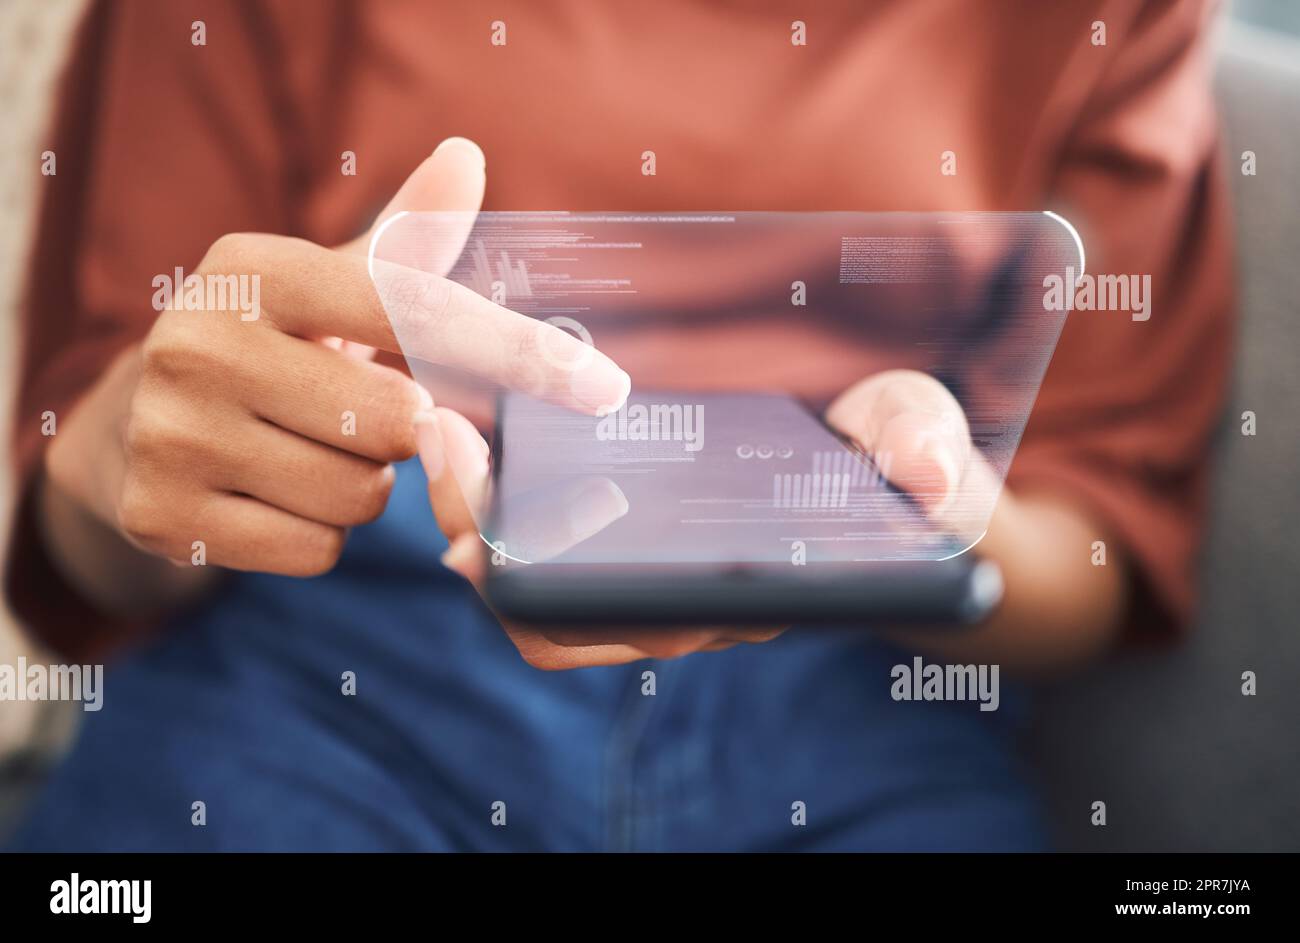 Closeup of unknown mixed race woman sitting alone at home and using her cellphone to browse a concept cgi internet. Hispanic scrolling and searching online and using creative artistic special effects Stock Photo